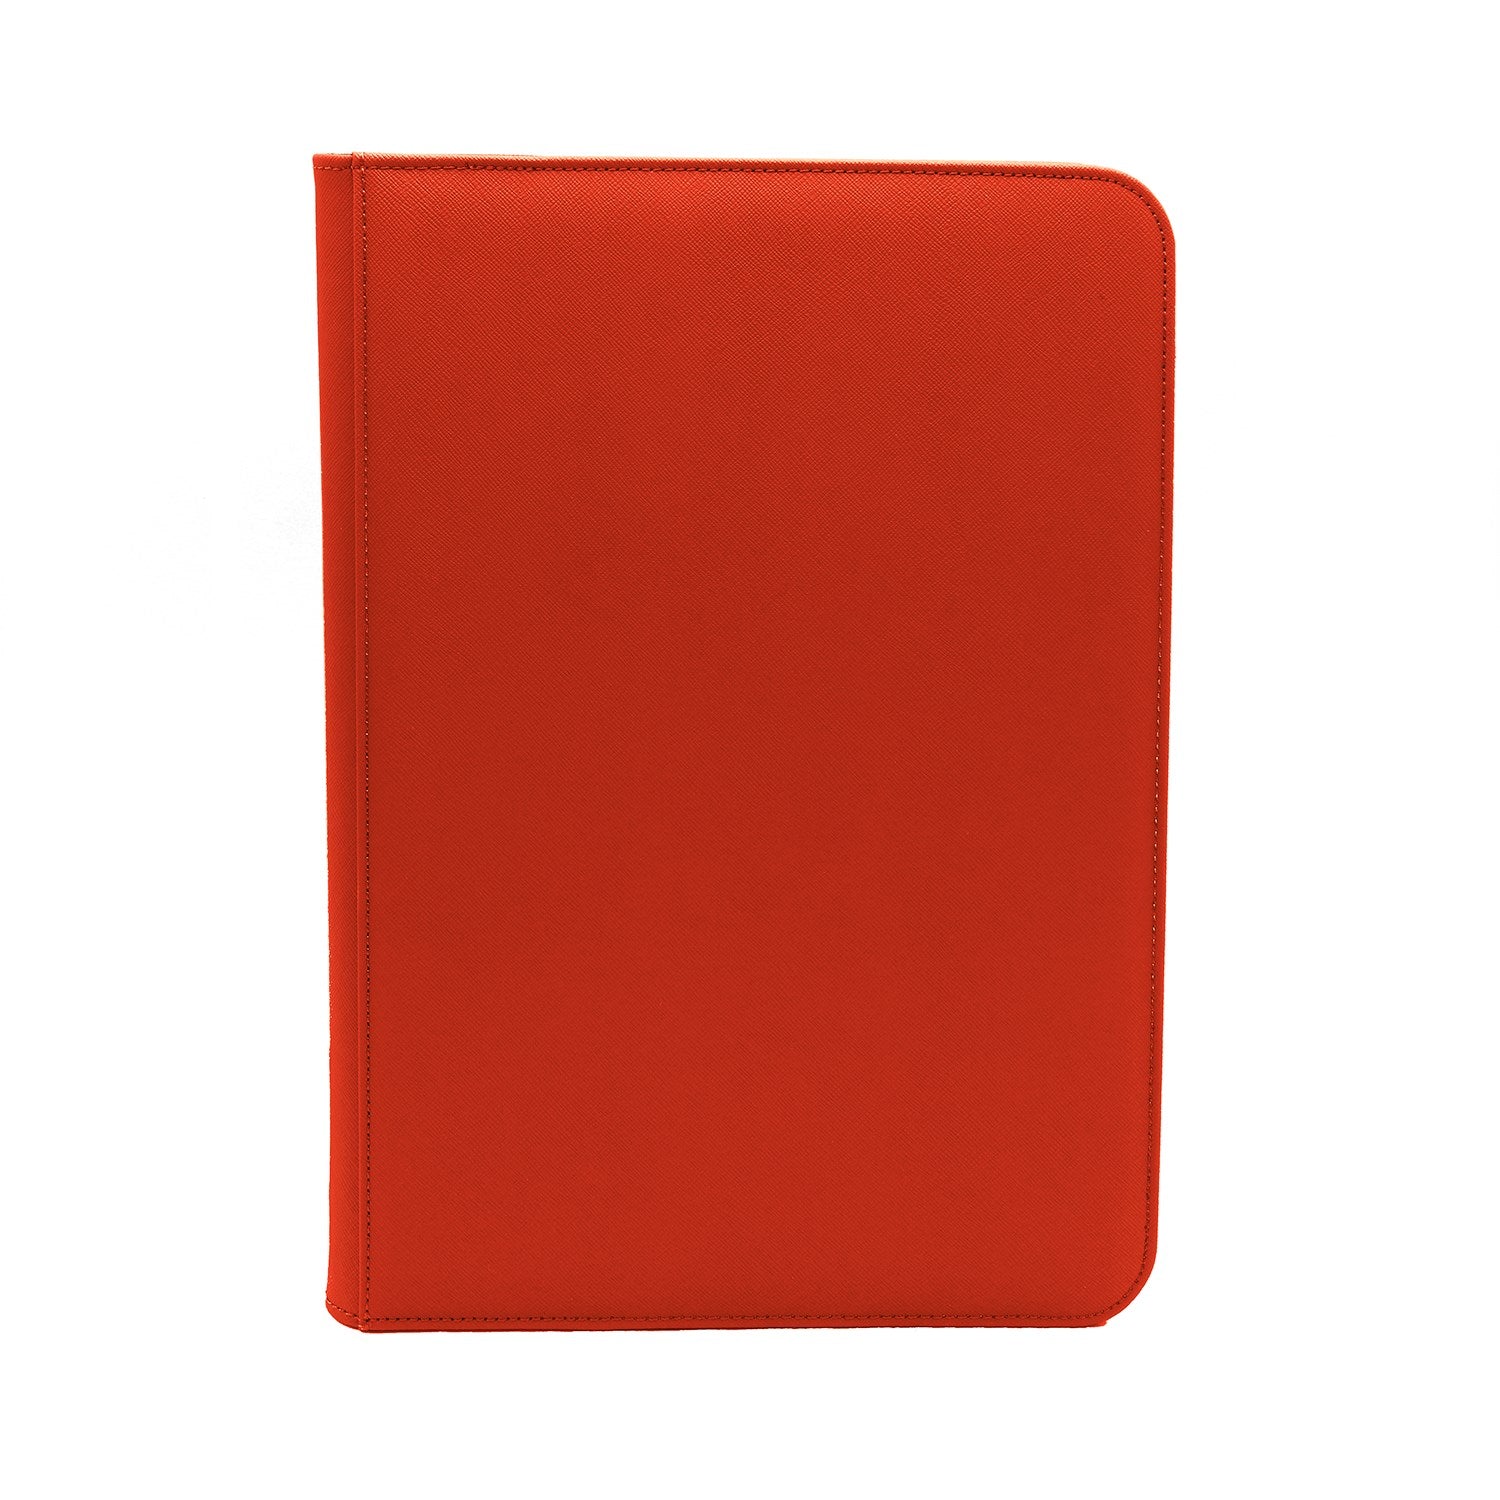 Dex Protection Zip-Up 9 Pocket Binder - Red - Local Pickup Only